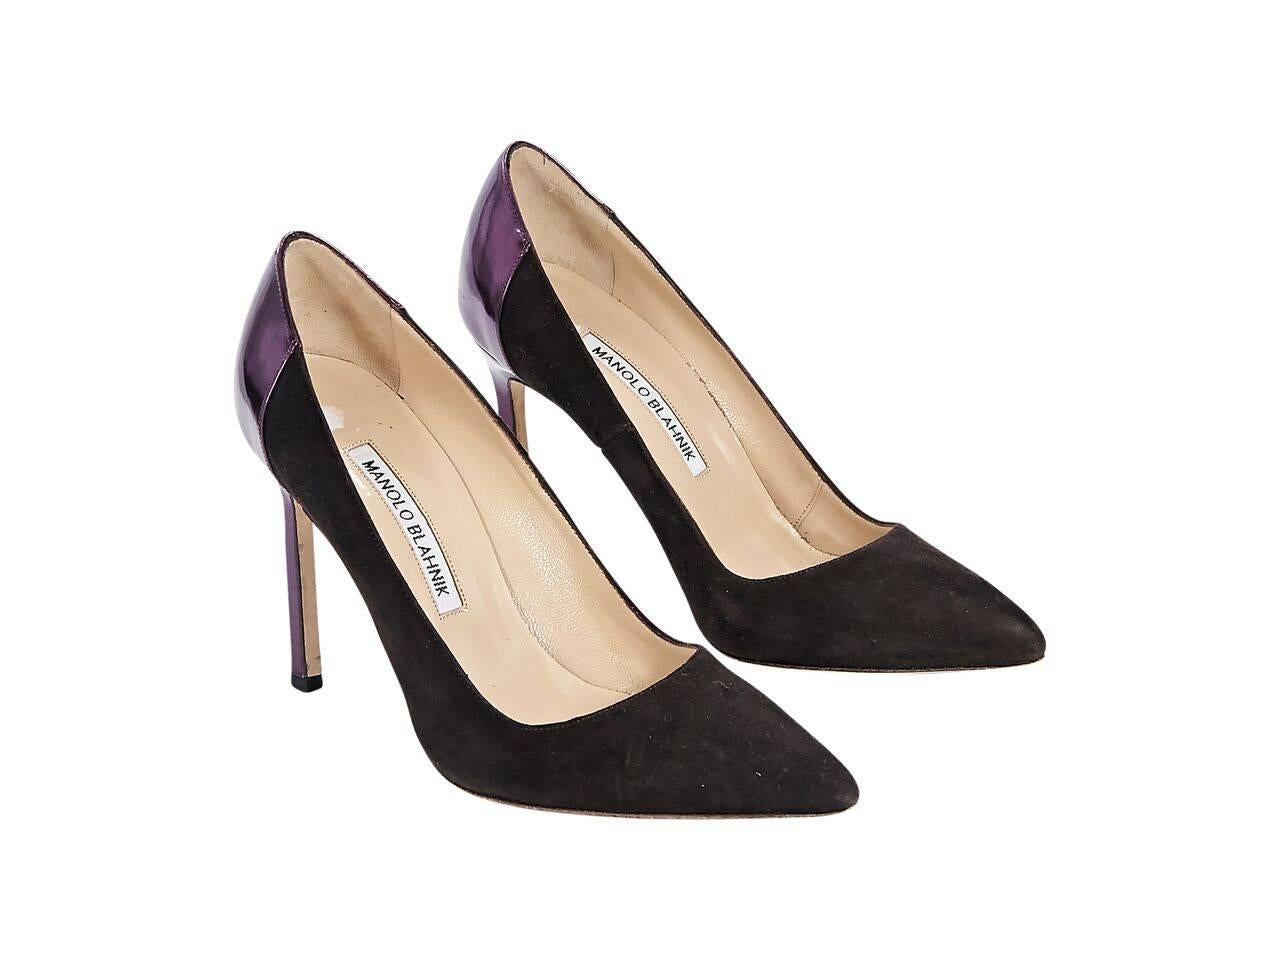 Product details:  Brown suede pumps by Manolo Blahnik.  Metallic purple leather trim.   Point toe.  Slip-on style. 
Condition: Pre-owned. Very good.
Est. Retail $ 798.00